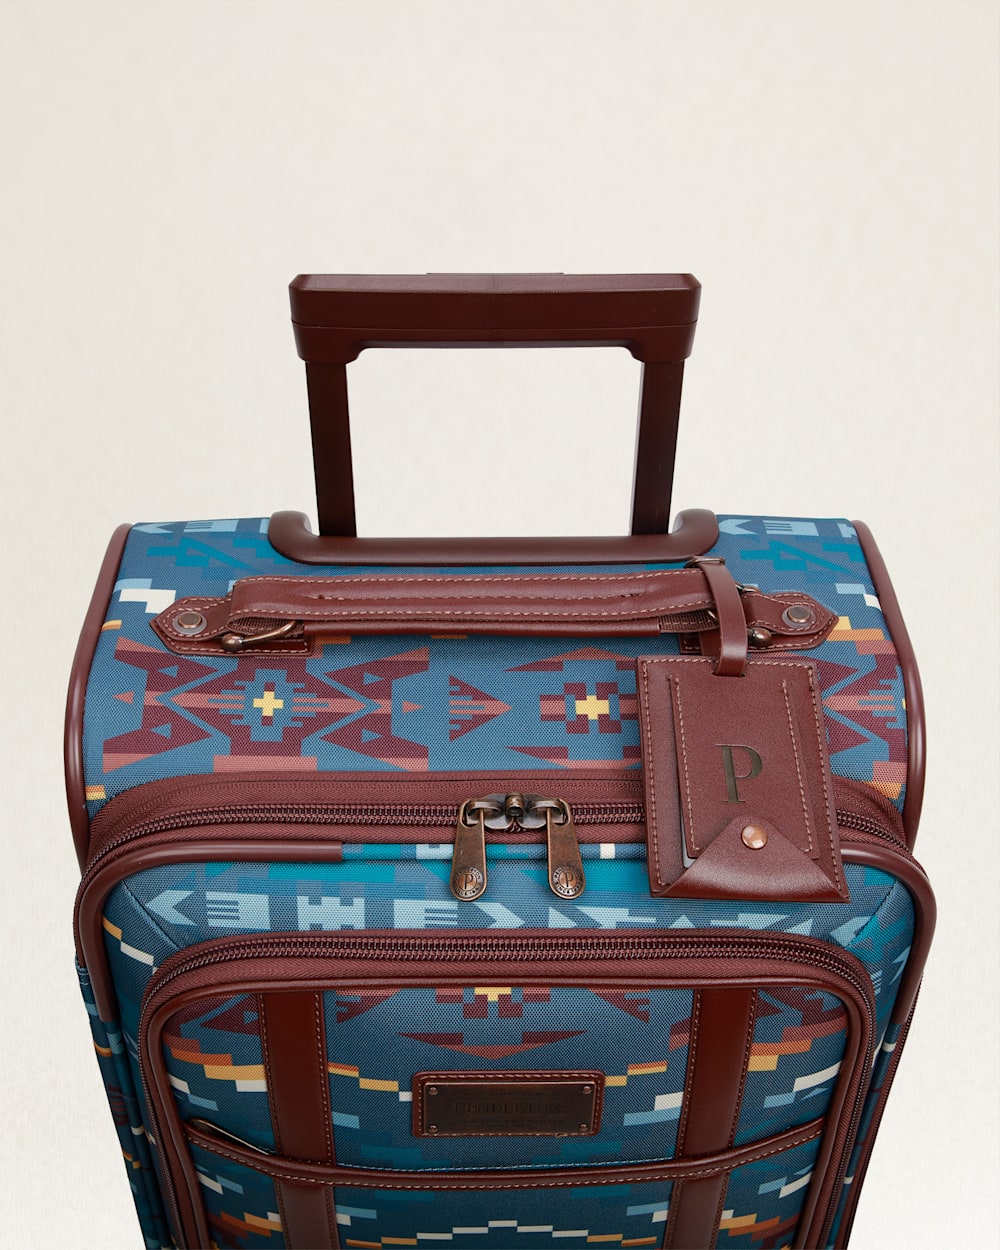 ALTERNATE VIEW OF CARICO LAKE 20" SOFTSIDE SPINNER LUGGAGE IN BLUE image number 6